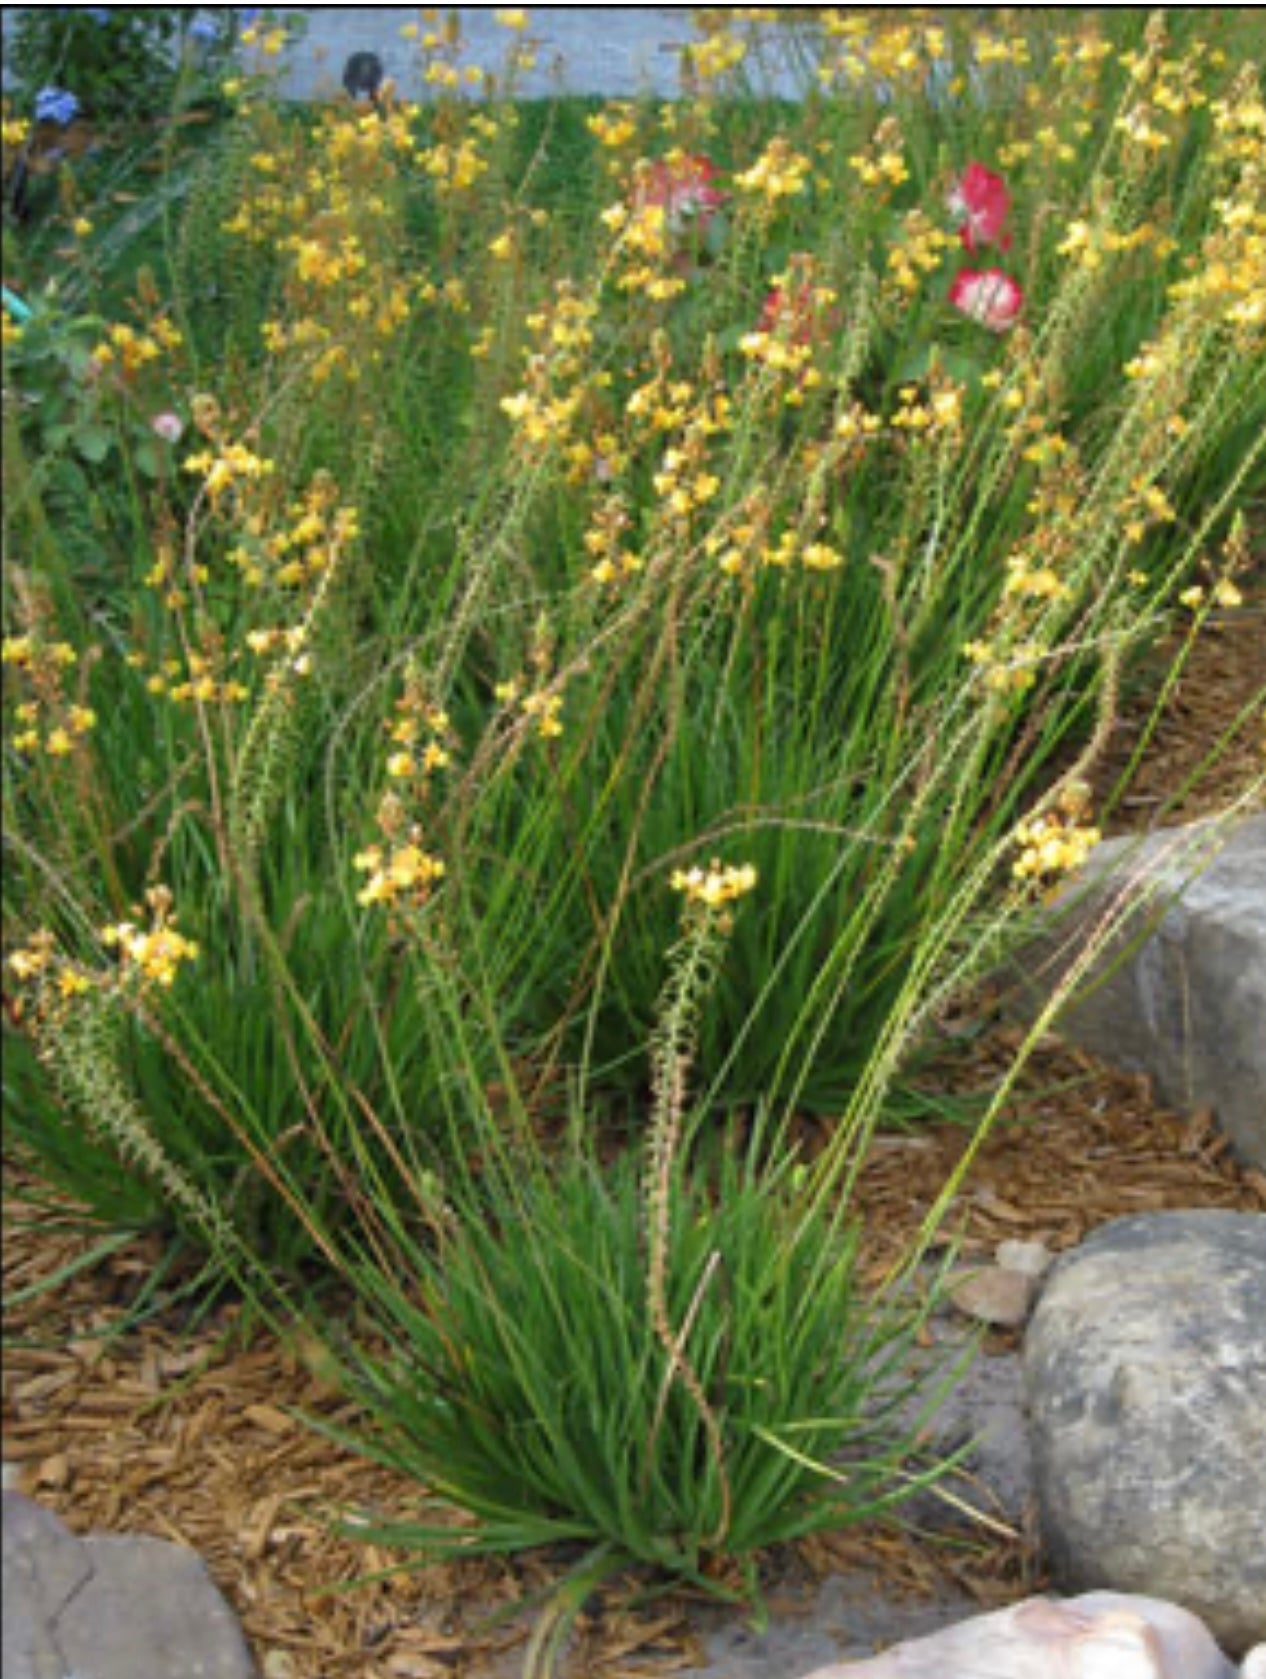 Yellow Stalked Bulbine BULBINE FRUTESCENS 'YELLOW'  Plant One Gallon Size Healthy Harvesters